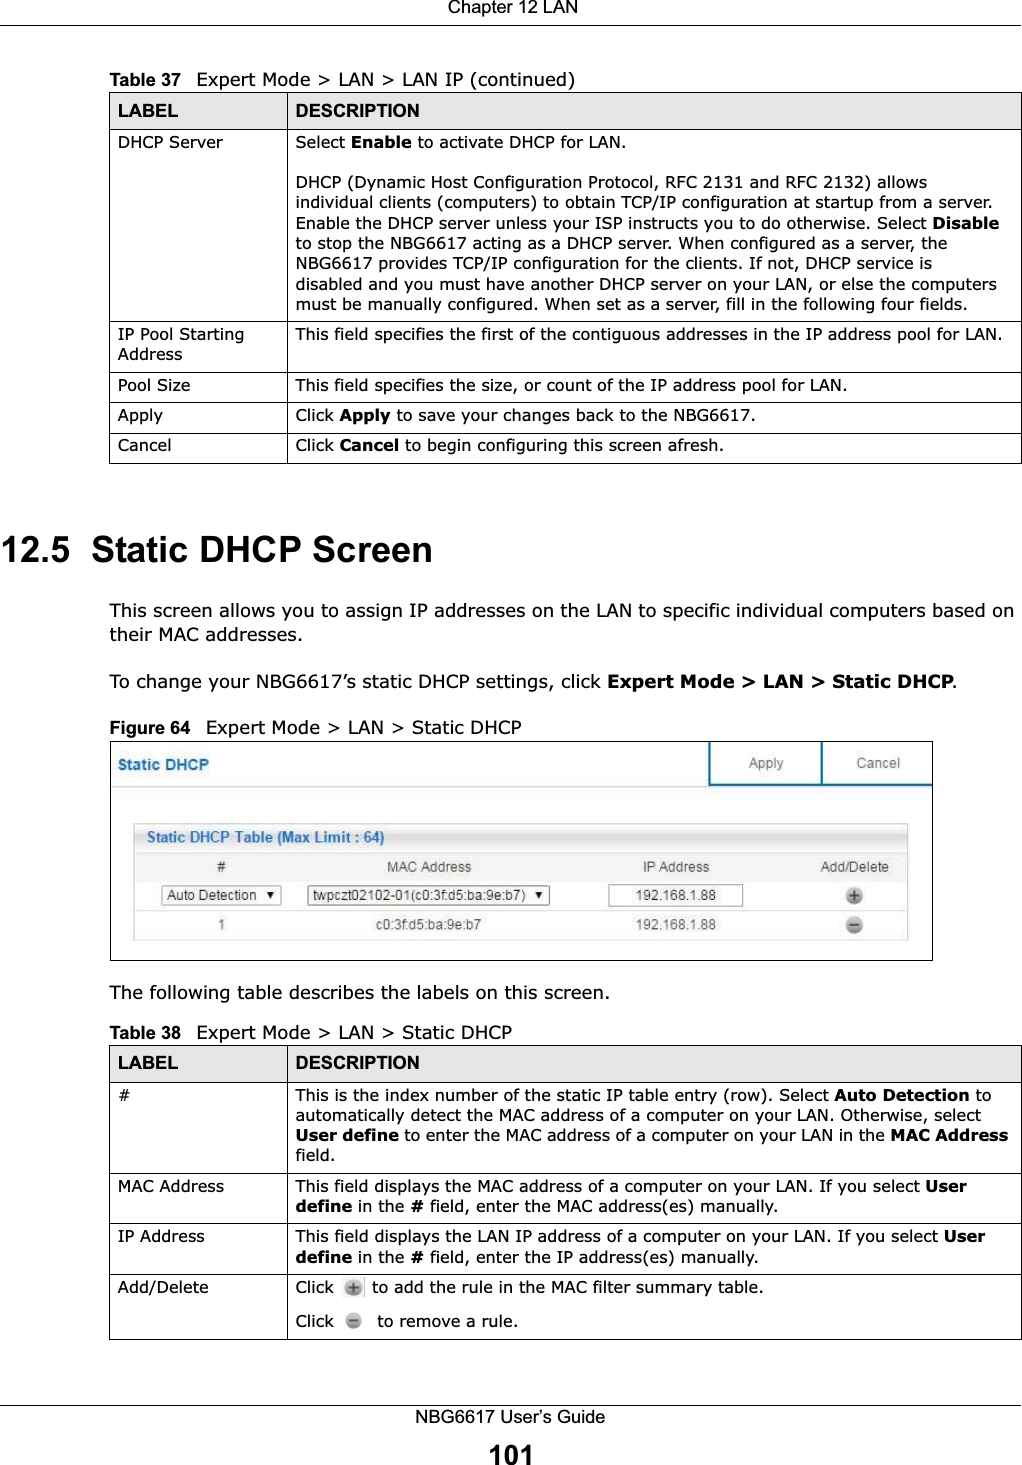  Chapter 12 LANNBG6617 User’s Guide10112.5  Static DHCP ScreenThis screen allows you to assign IP addresses on the LAN to specific individual computers based on their MAC addresses. To change your NBG6617’s static DHCP settings, click Expert Mode &gt; LAN &gt; Static DHCP.Figure 64   Expert Mode &gt; LAN &gt; Static DHCP The following table describes the labels on this screen.DHCP Server Select Enable to activate DHCP for LAN.DHCP (Dynamic Host Configuration Protocol, RFC 2131 and RFC 2132) allows individual clients (computers) to obtain TCP/IP configuration at startup from a server. Enable the DHCP server unless your ISP instructs you to do otherwise. Select Disable to stop the NBG6617 acting as a DHCP server. When configured as a server, the NBG6617 provides TCP/IP configuration for the clients. If not, DHCP service is disabled and you must have another DHCP server on your LAN, or else the computers must be manually configured. When set as a server, fill in the following four fields.IP Pool Starting AddressThis field specifies the first of the contiguous addresses in the IP address pool for LAN.Pool Size This field specifies the size, or count of the IP address pool for LAN.Apply Click Apply to save your changes back to the NBG6617.Cancel Click Cancel to begin configuring this screen afresh.Table 37   Expert Mode &gt; LAN &gt; LAN IP (continued)LABEL DESCRIPTIONTable 38   Expert Mode &gt; LAN &gt; Static DHCP LABEL DESCRIPTION#This is the index number of the static IP table entry (row). Select Auto Detection to automatically detect the MAC address of a computer on your LAN. Otherwise, select User define to enter the MAC address of a computer on your LAN in the MAC Address field.MAC Address This field displays the MAC address of a computer on your LAN. If you select User define in the # field, enter the MAC address(es) manually.IP Address This field displays the LAN IP address of a computer on your LAN. If you select User define in the # field, enter the IP address(es) manually.Add/Delete Click   to add the rule in the MAC filter summary table.Click   to remove a rule.